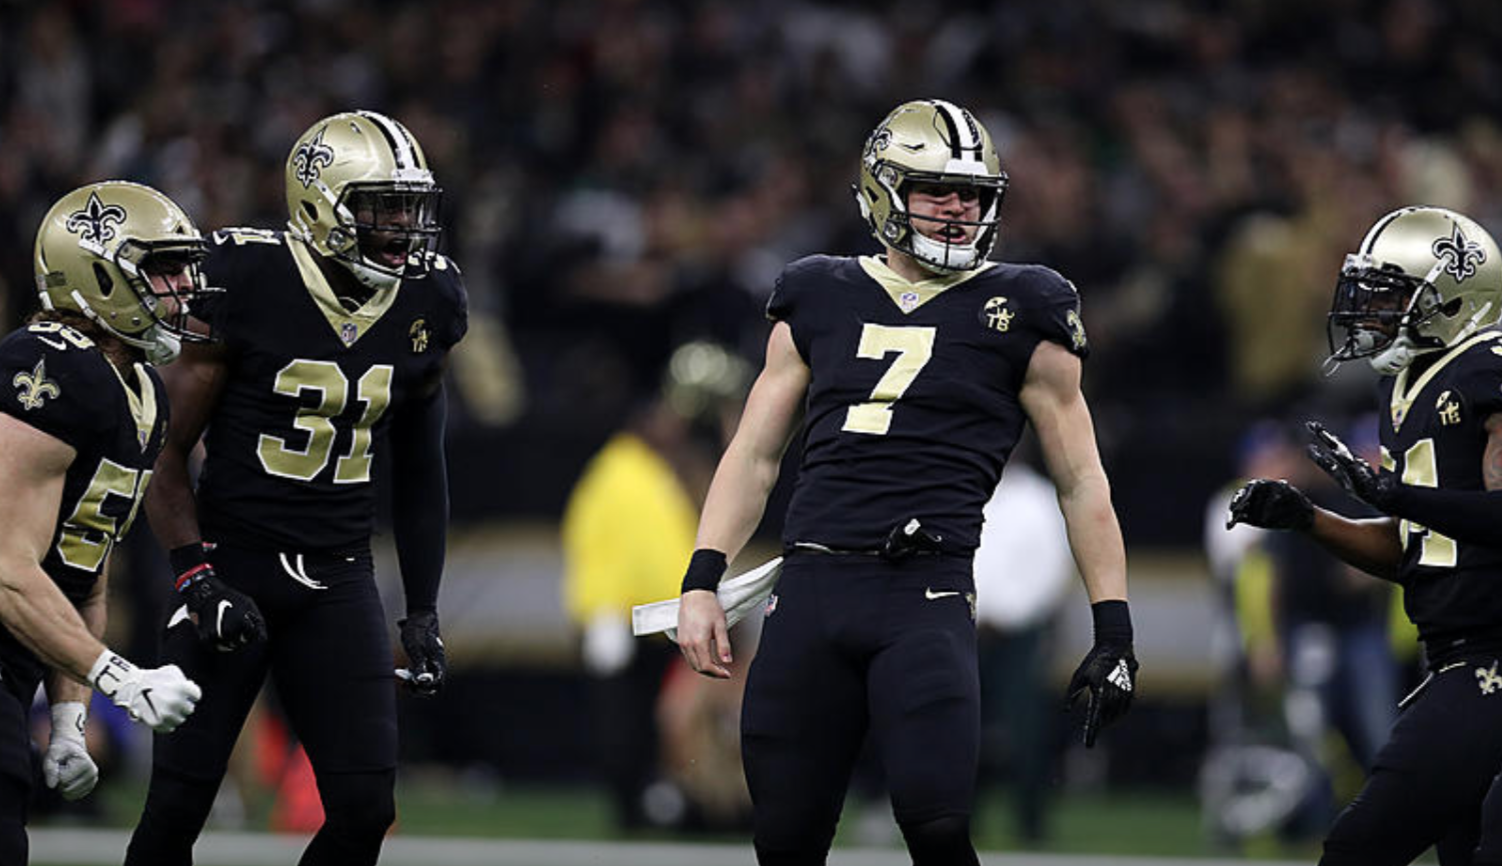 NFC Divisional Home Game: New Orleans Saints vs. TBD (Date: TBD - If Necessary) [CANCELLED] at Mercedes Benz Superdome